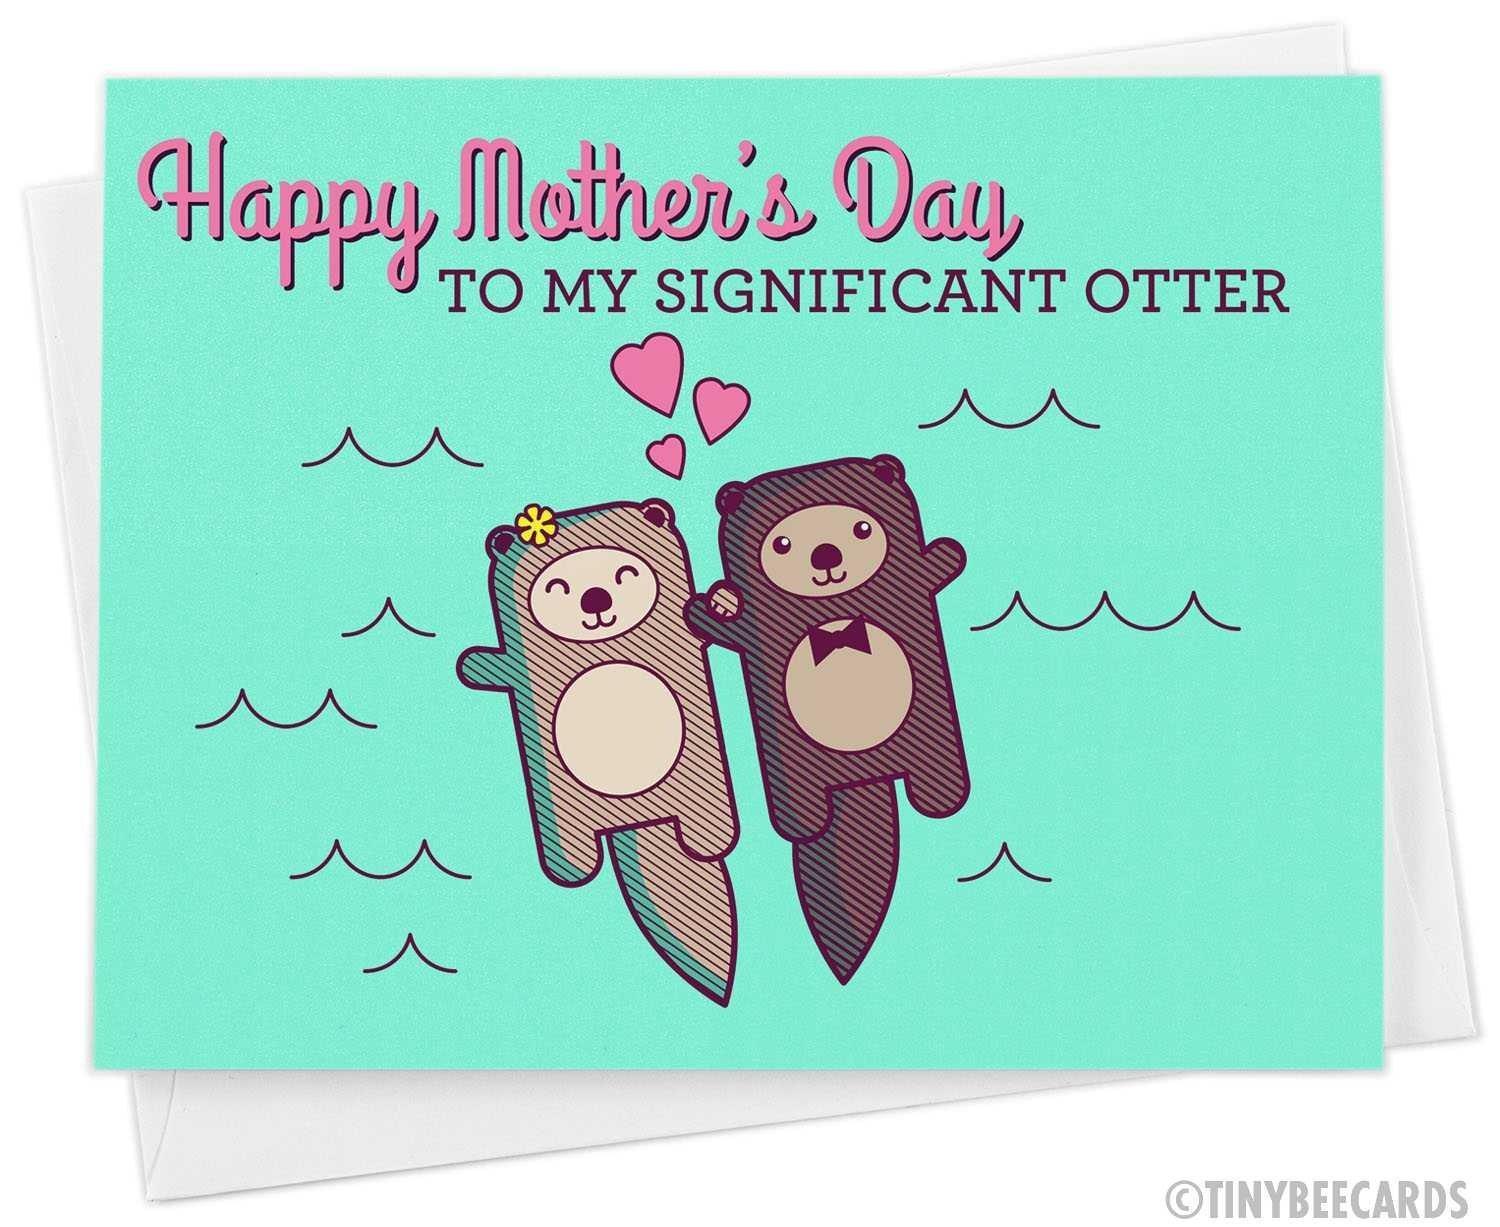 Happy Mother's Day to my Significant Otter